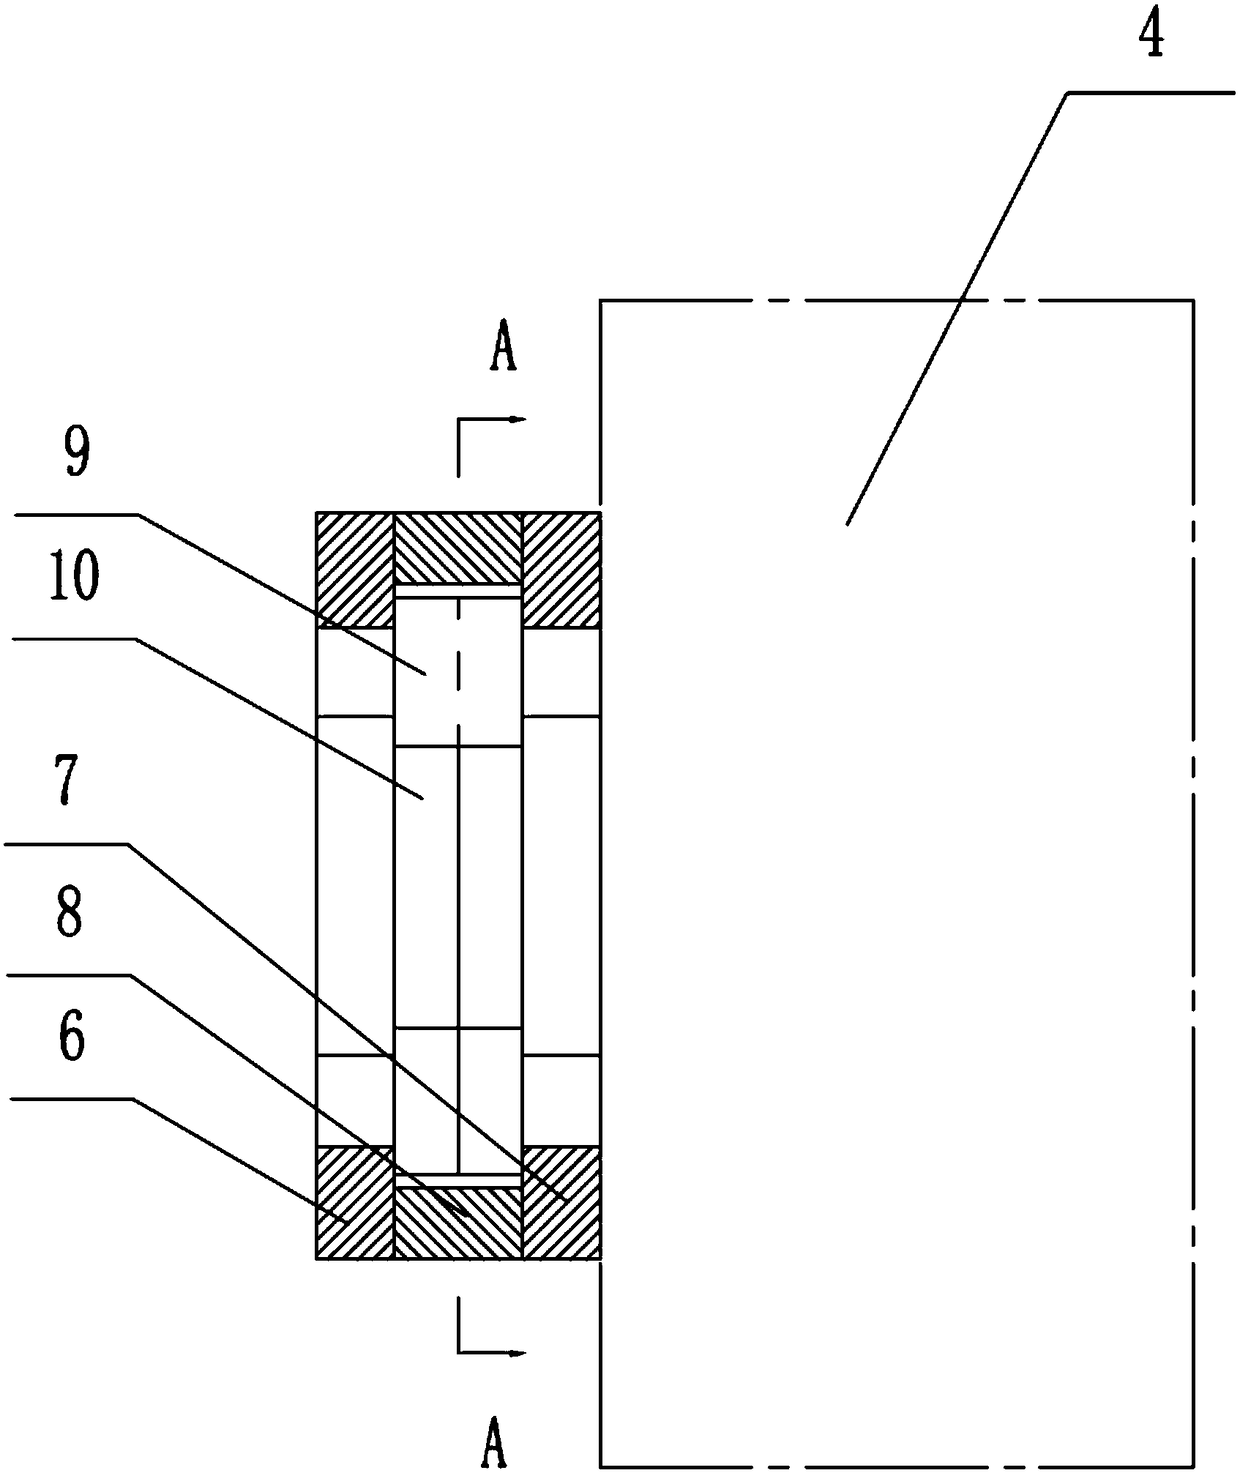 Traction power system for elevator